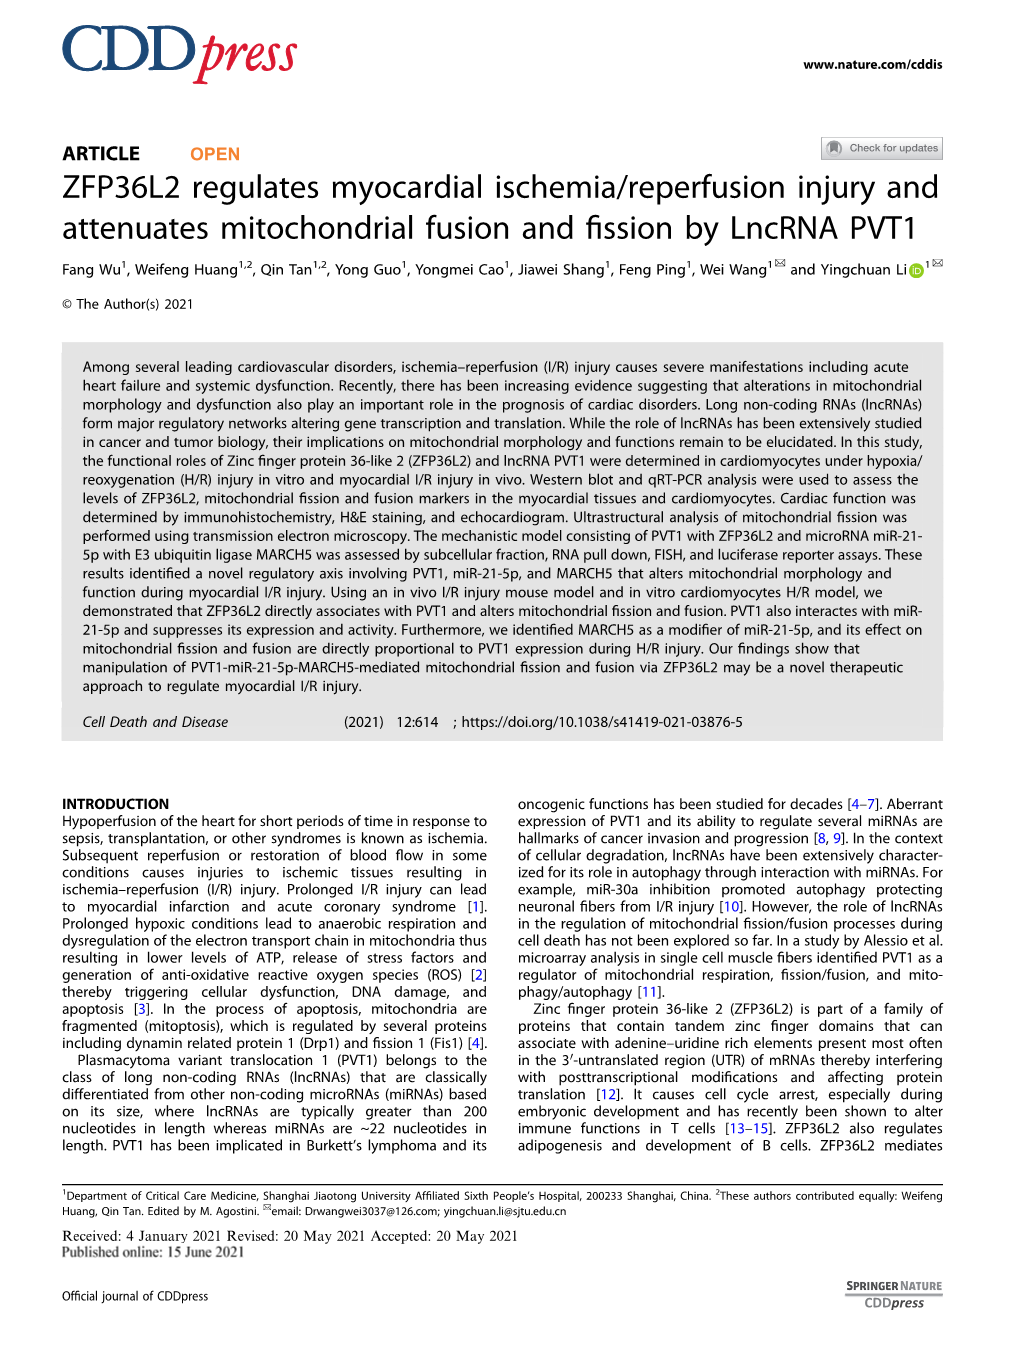 ZFP36L2 Regulates Myocardial Ischemia/Reperfusion Injury And